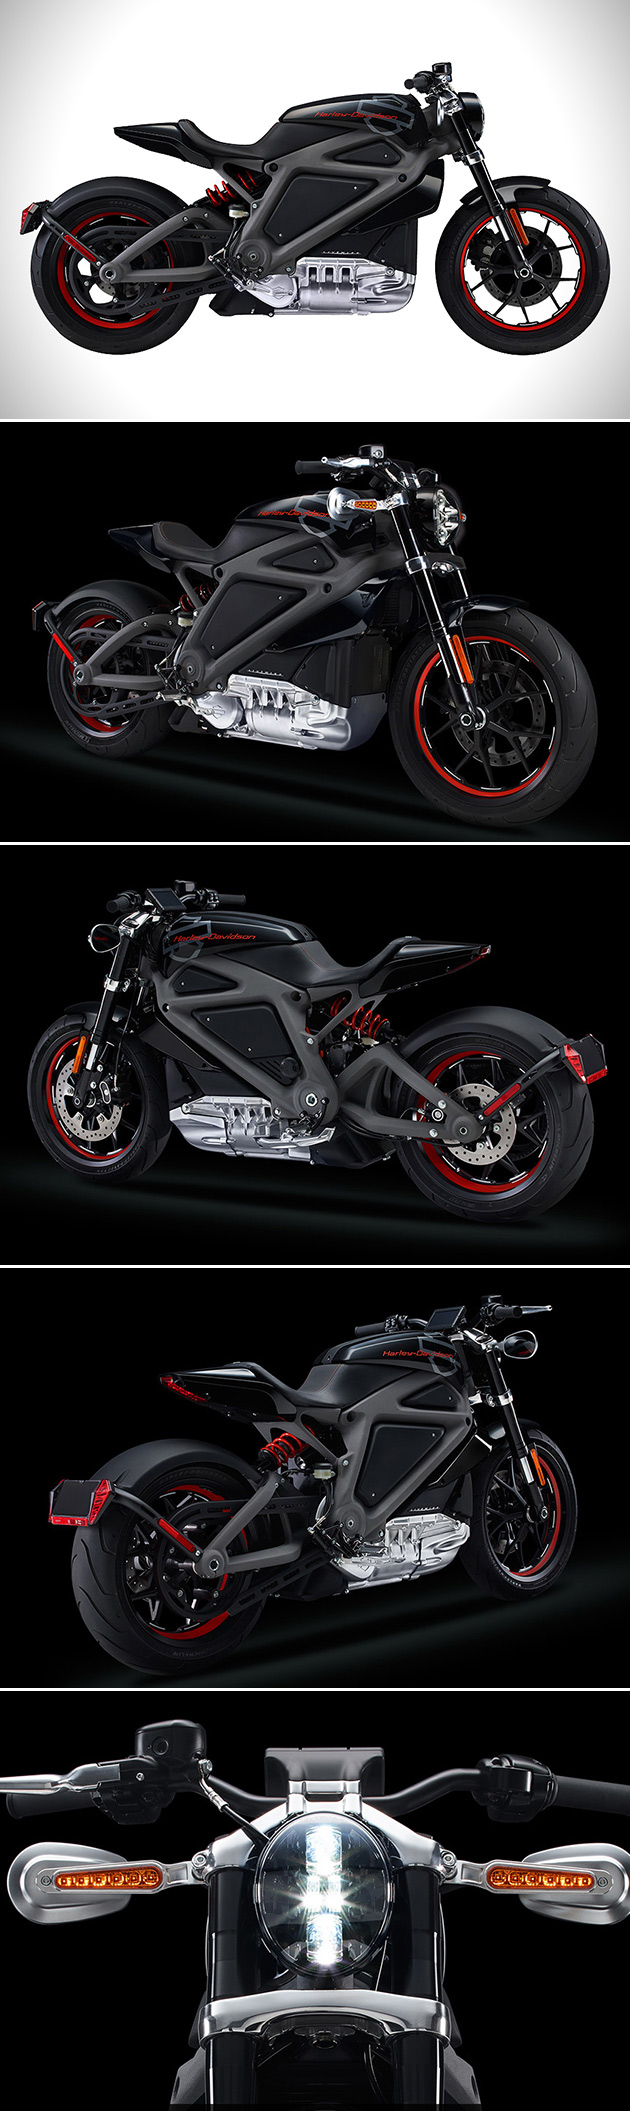 Harley Davidson LiveWire Electric Motorcycle